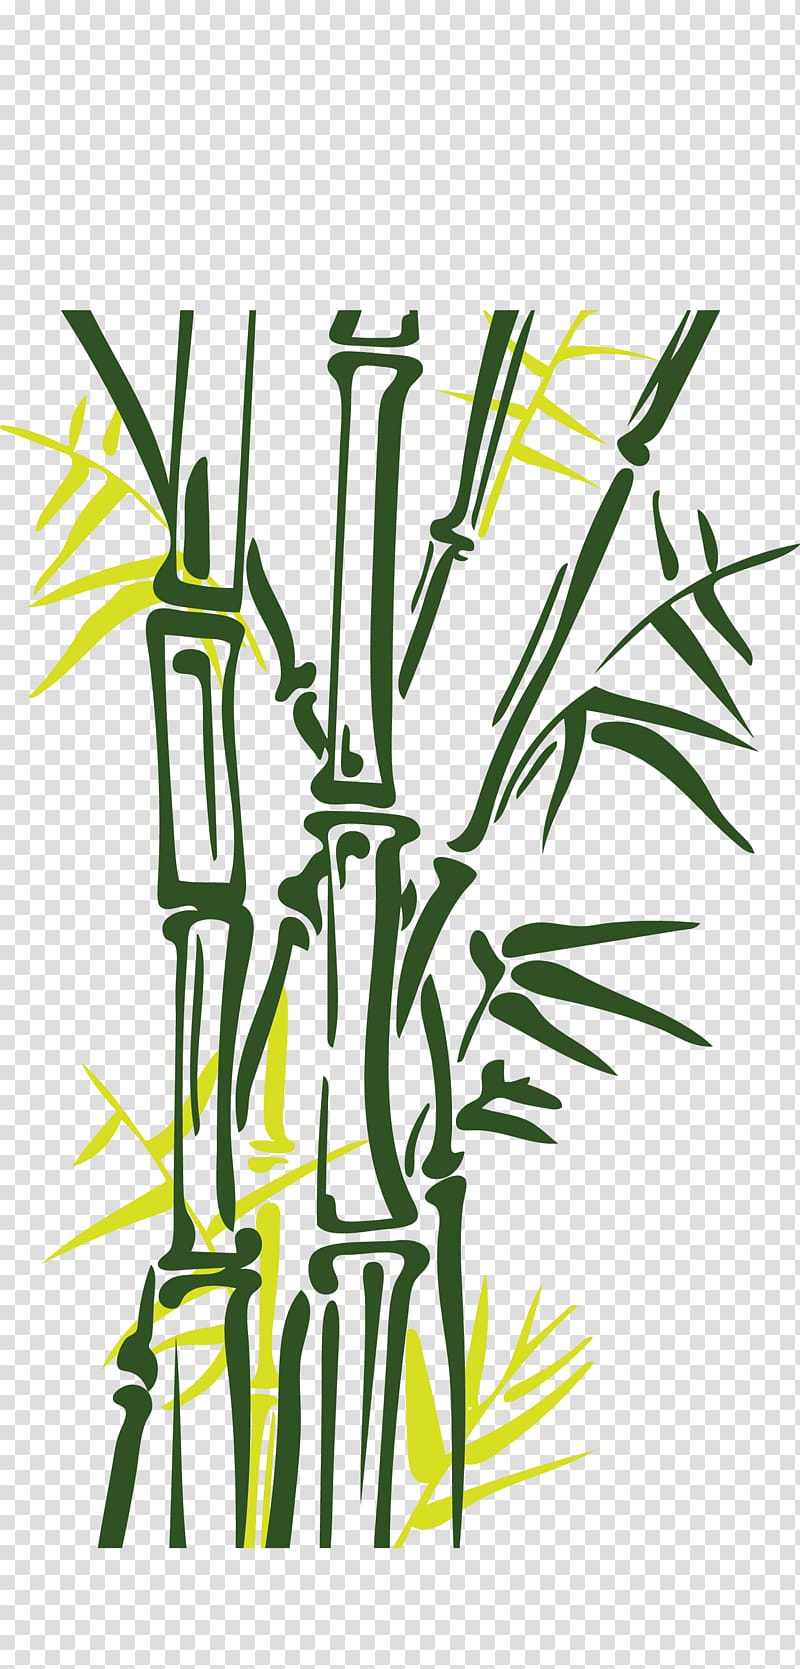 Bamboo Euclidean Painting Illustration, Hand-painted bamboo transparent background PNG clipart